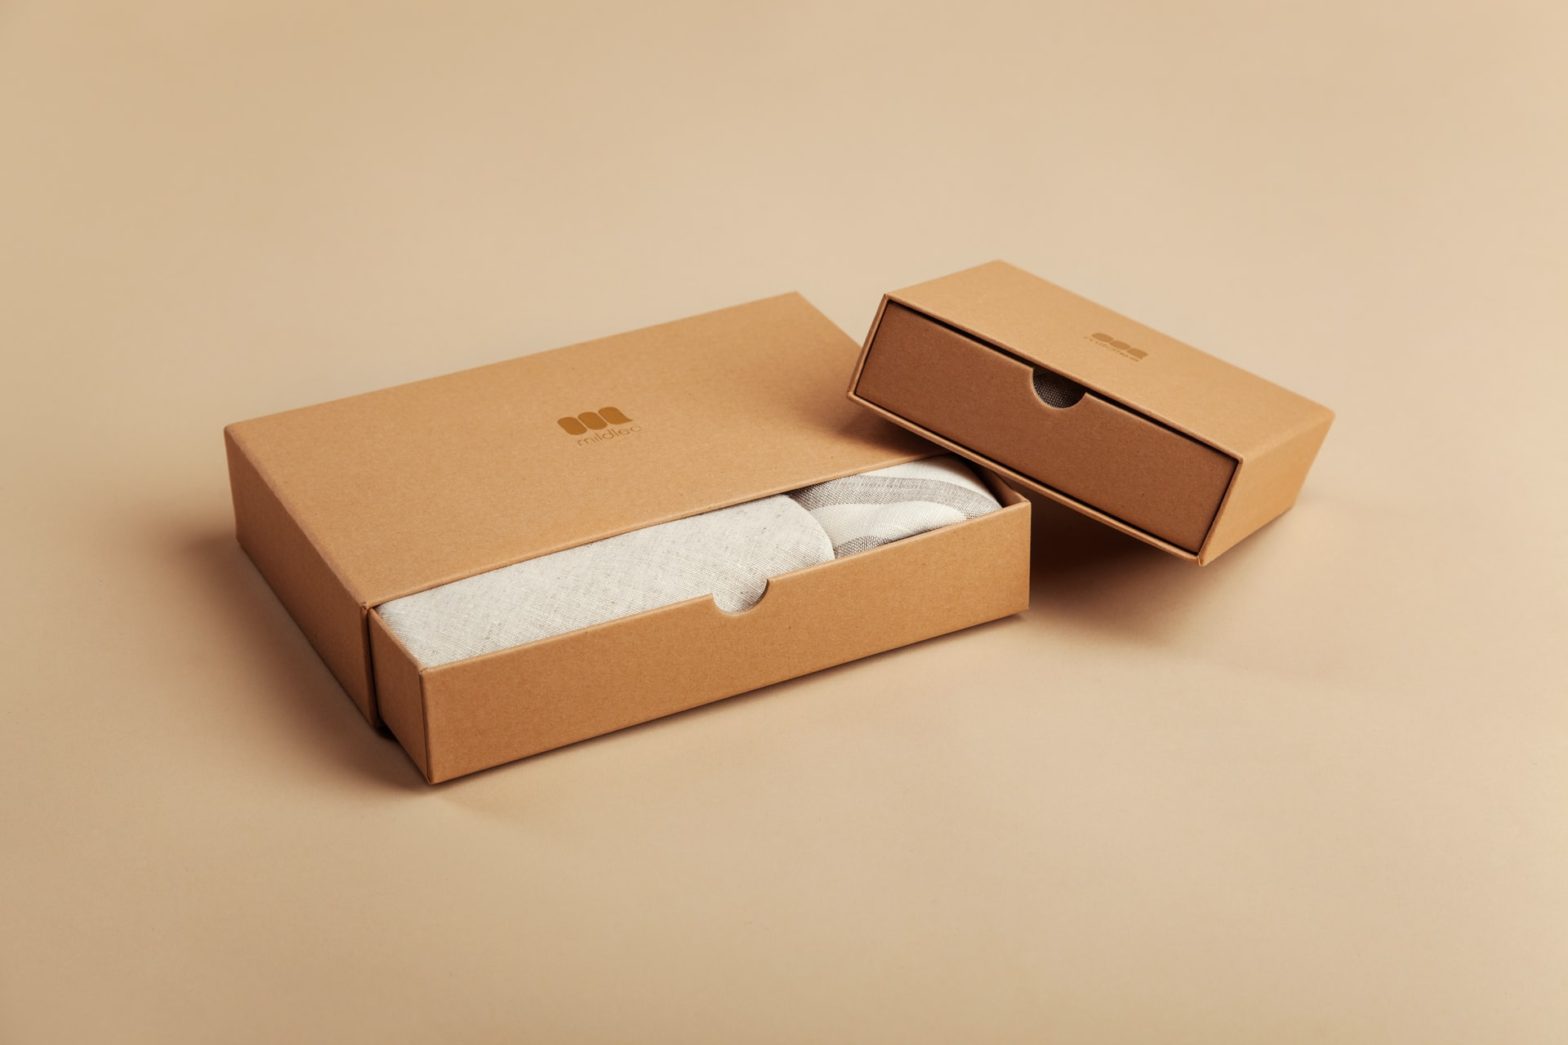 Mailer-Boxes-efficaciously-uplift-the-Outlook-of-your-Products